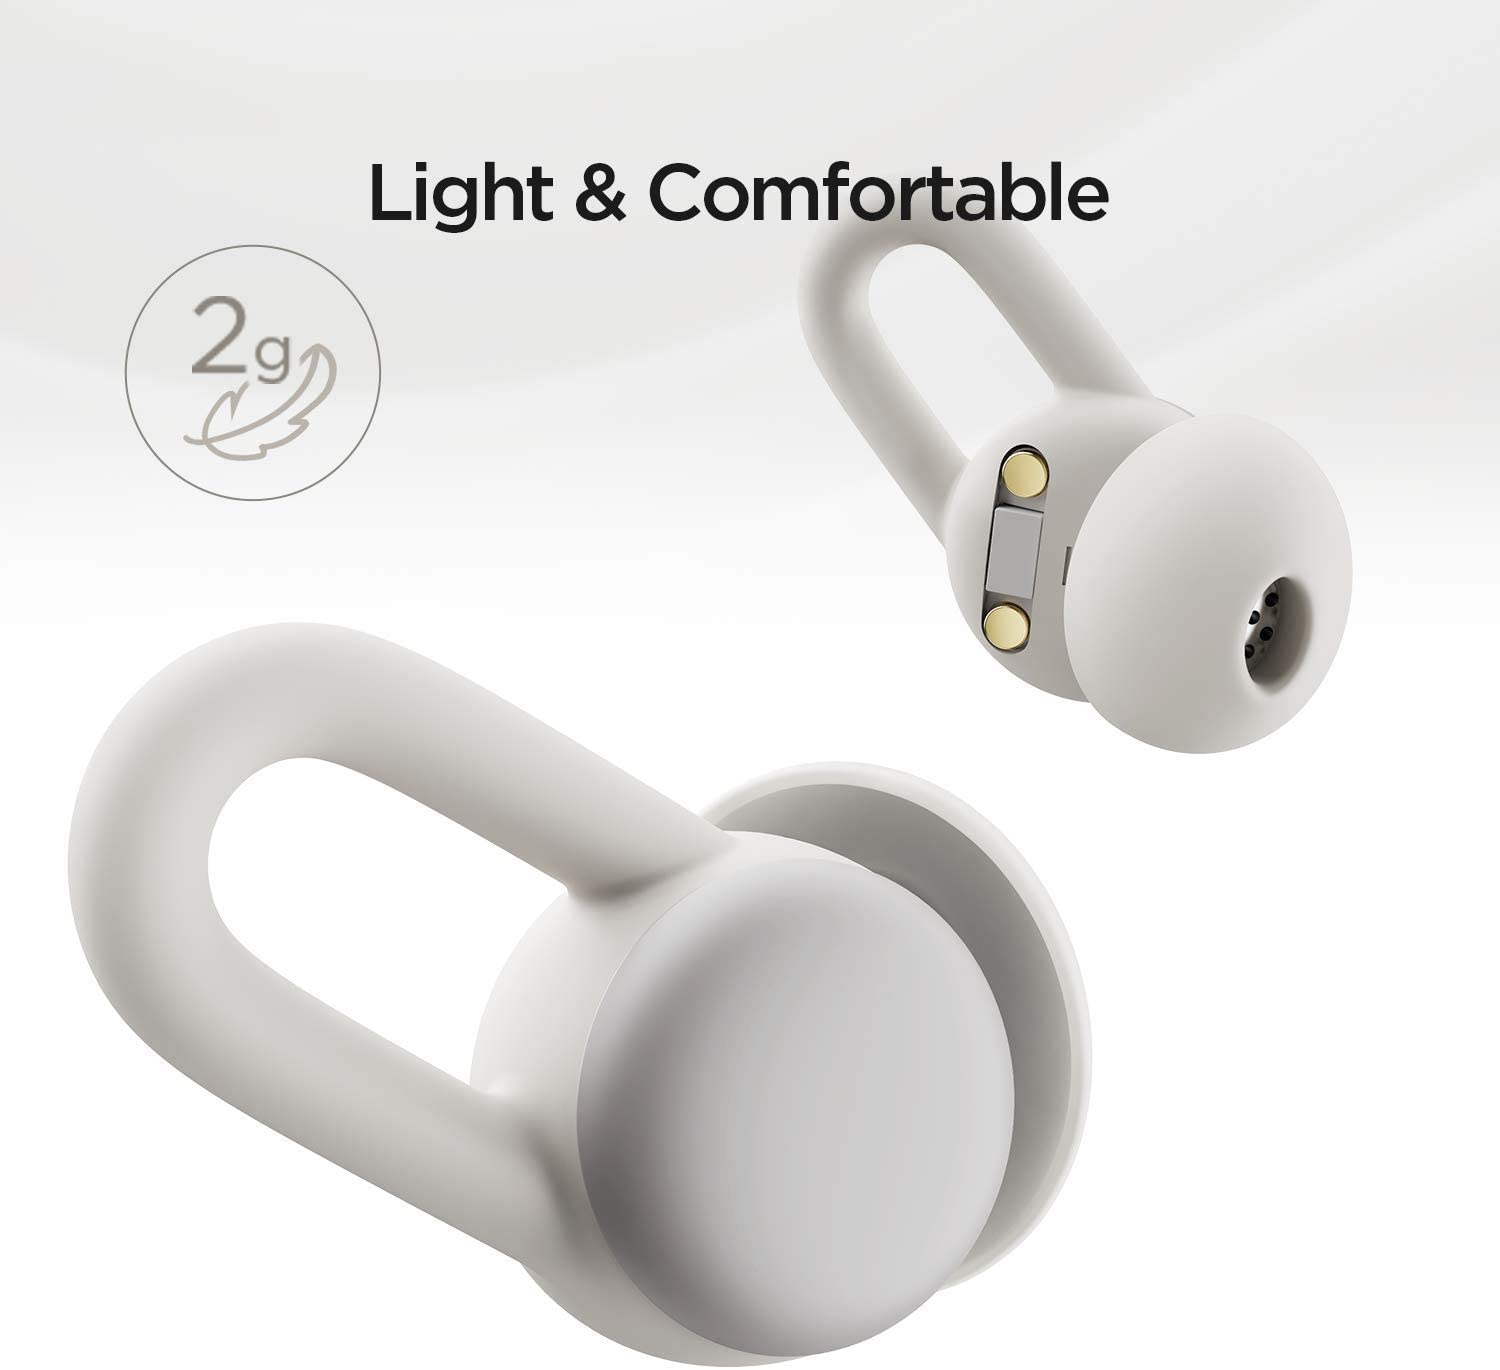 [1-Day Deal] Amazfit Zenbuds Smart Sleep Earbuds, Noise Blocking, In-Ear Alarm, Soothing Sounds, Light, Comfortable $96 + Free Shipping